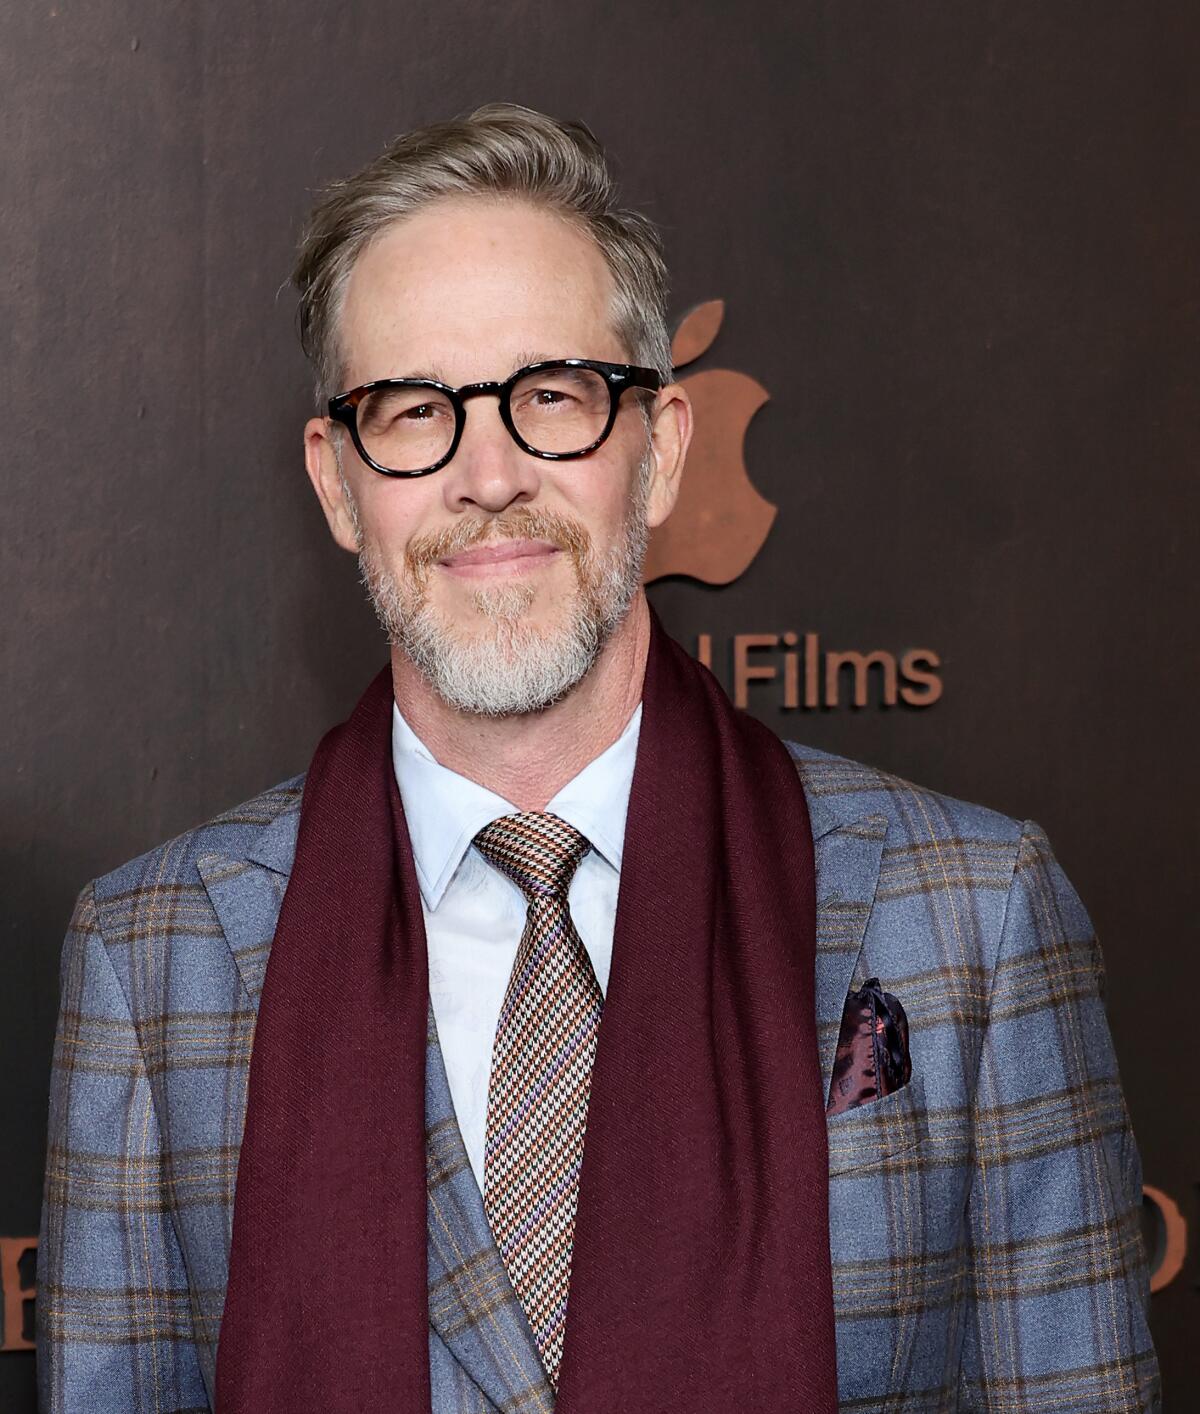 A man with a gray goatee and glasses poses in a plaid suit and scarf at a movie premiere. 